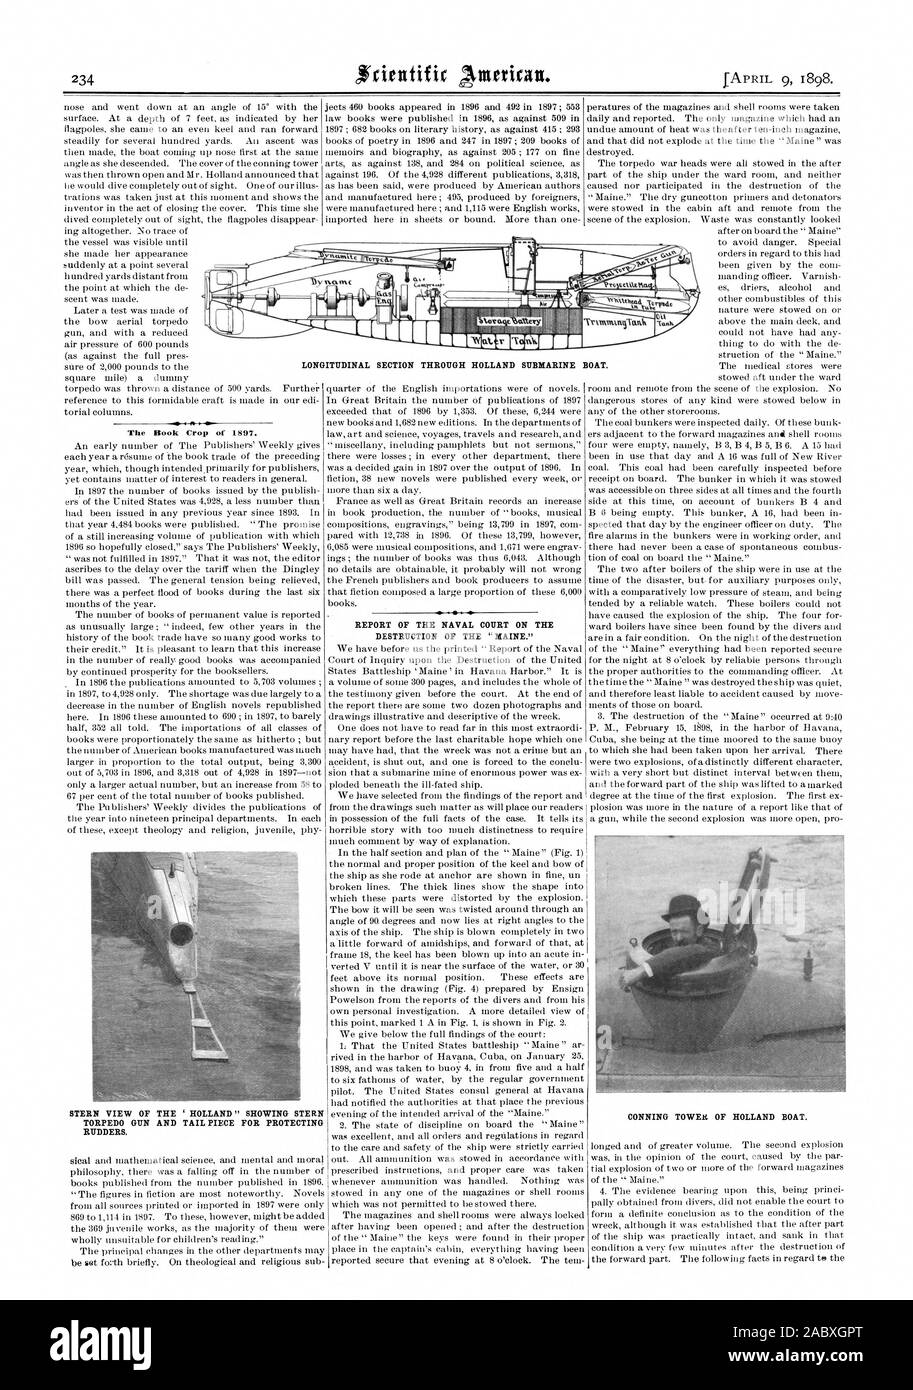 LONGITUDINAL SECTION THROUGH HOLLAND SUBMARINE BOAT. The Book Crop of 1897. STERN VIEW OF THE 'HOLLAND' SHOWING STERN TORPEDO GUN AND TAIL PIECE FOR PROTECTING RUDDERS. DESTRUCTION OF THE ' MAINE., scientific american, 1898-04-09 Stock Photo